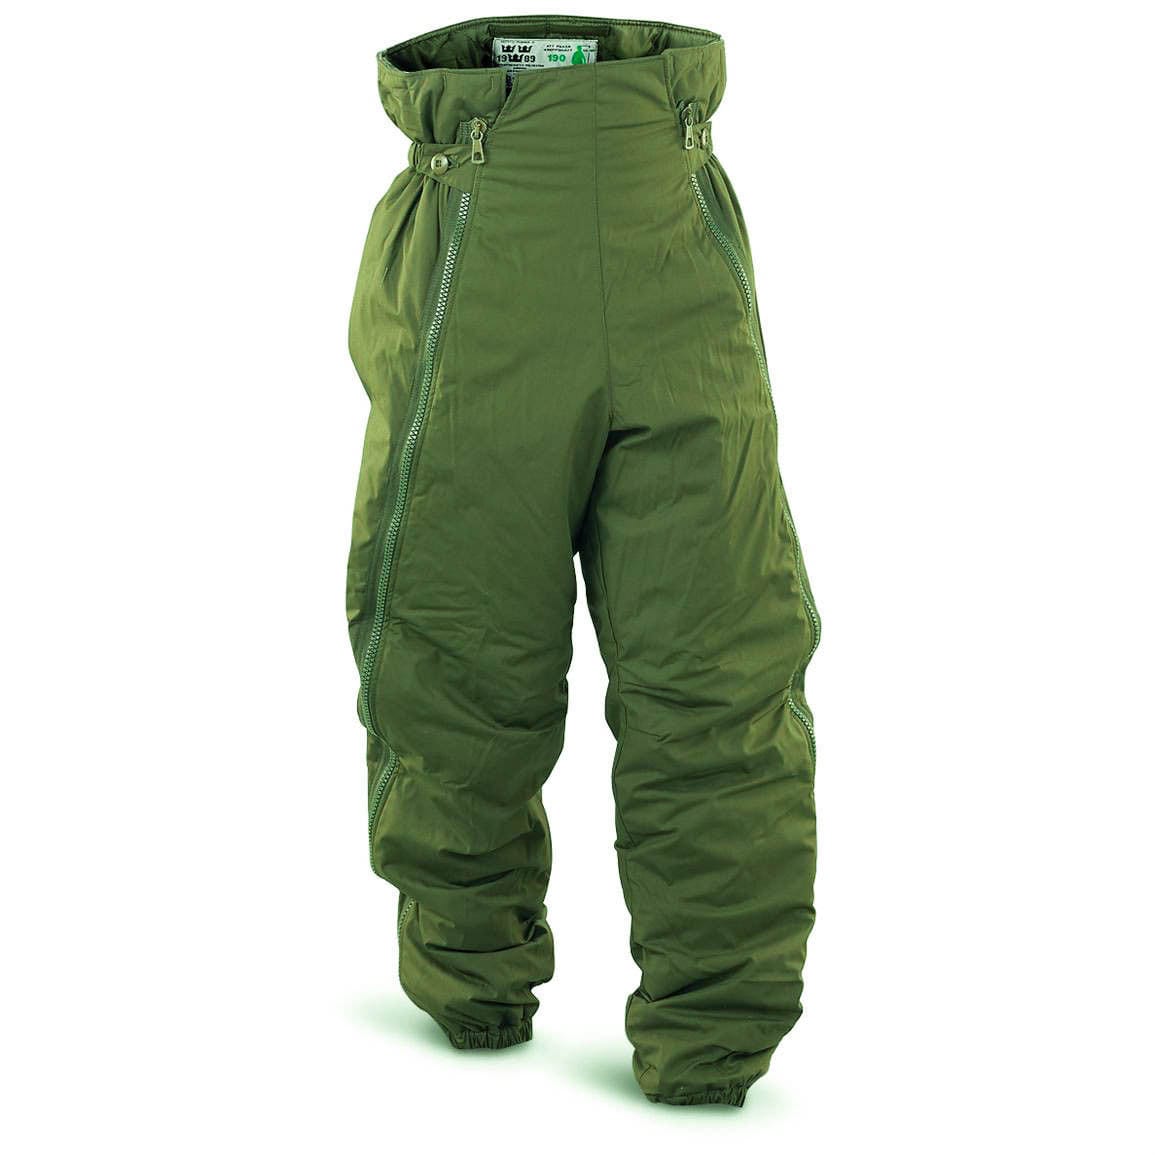 Genuine Swedish Army Pants Insulated M90 Green Thermal Trousers